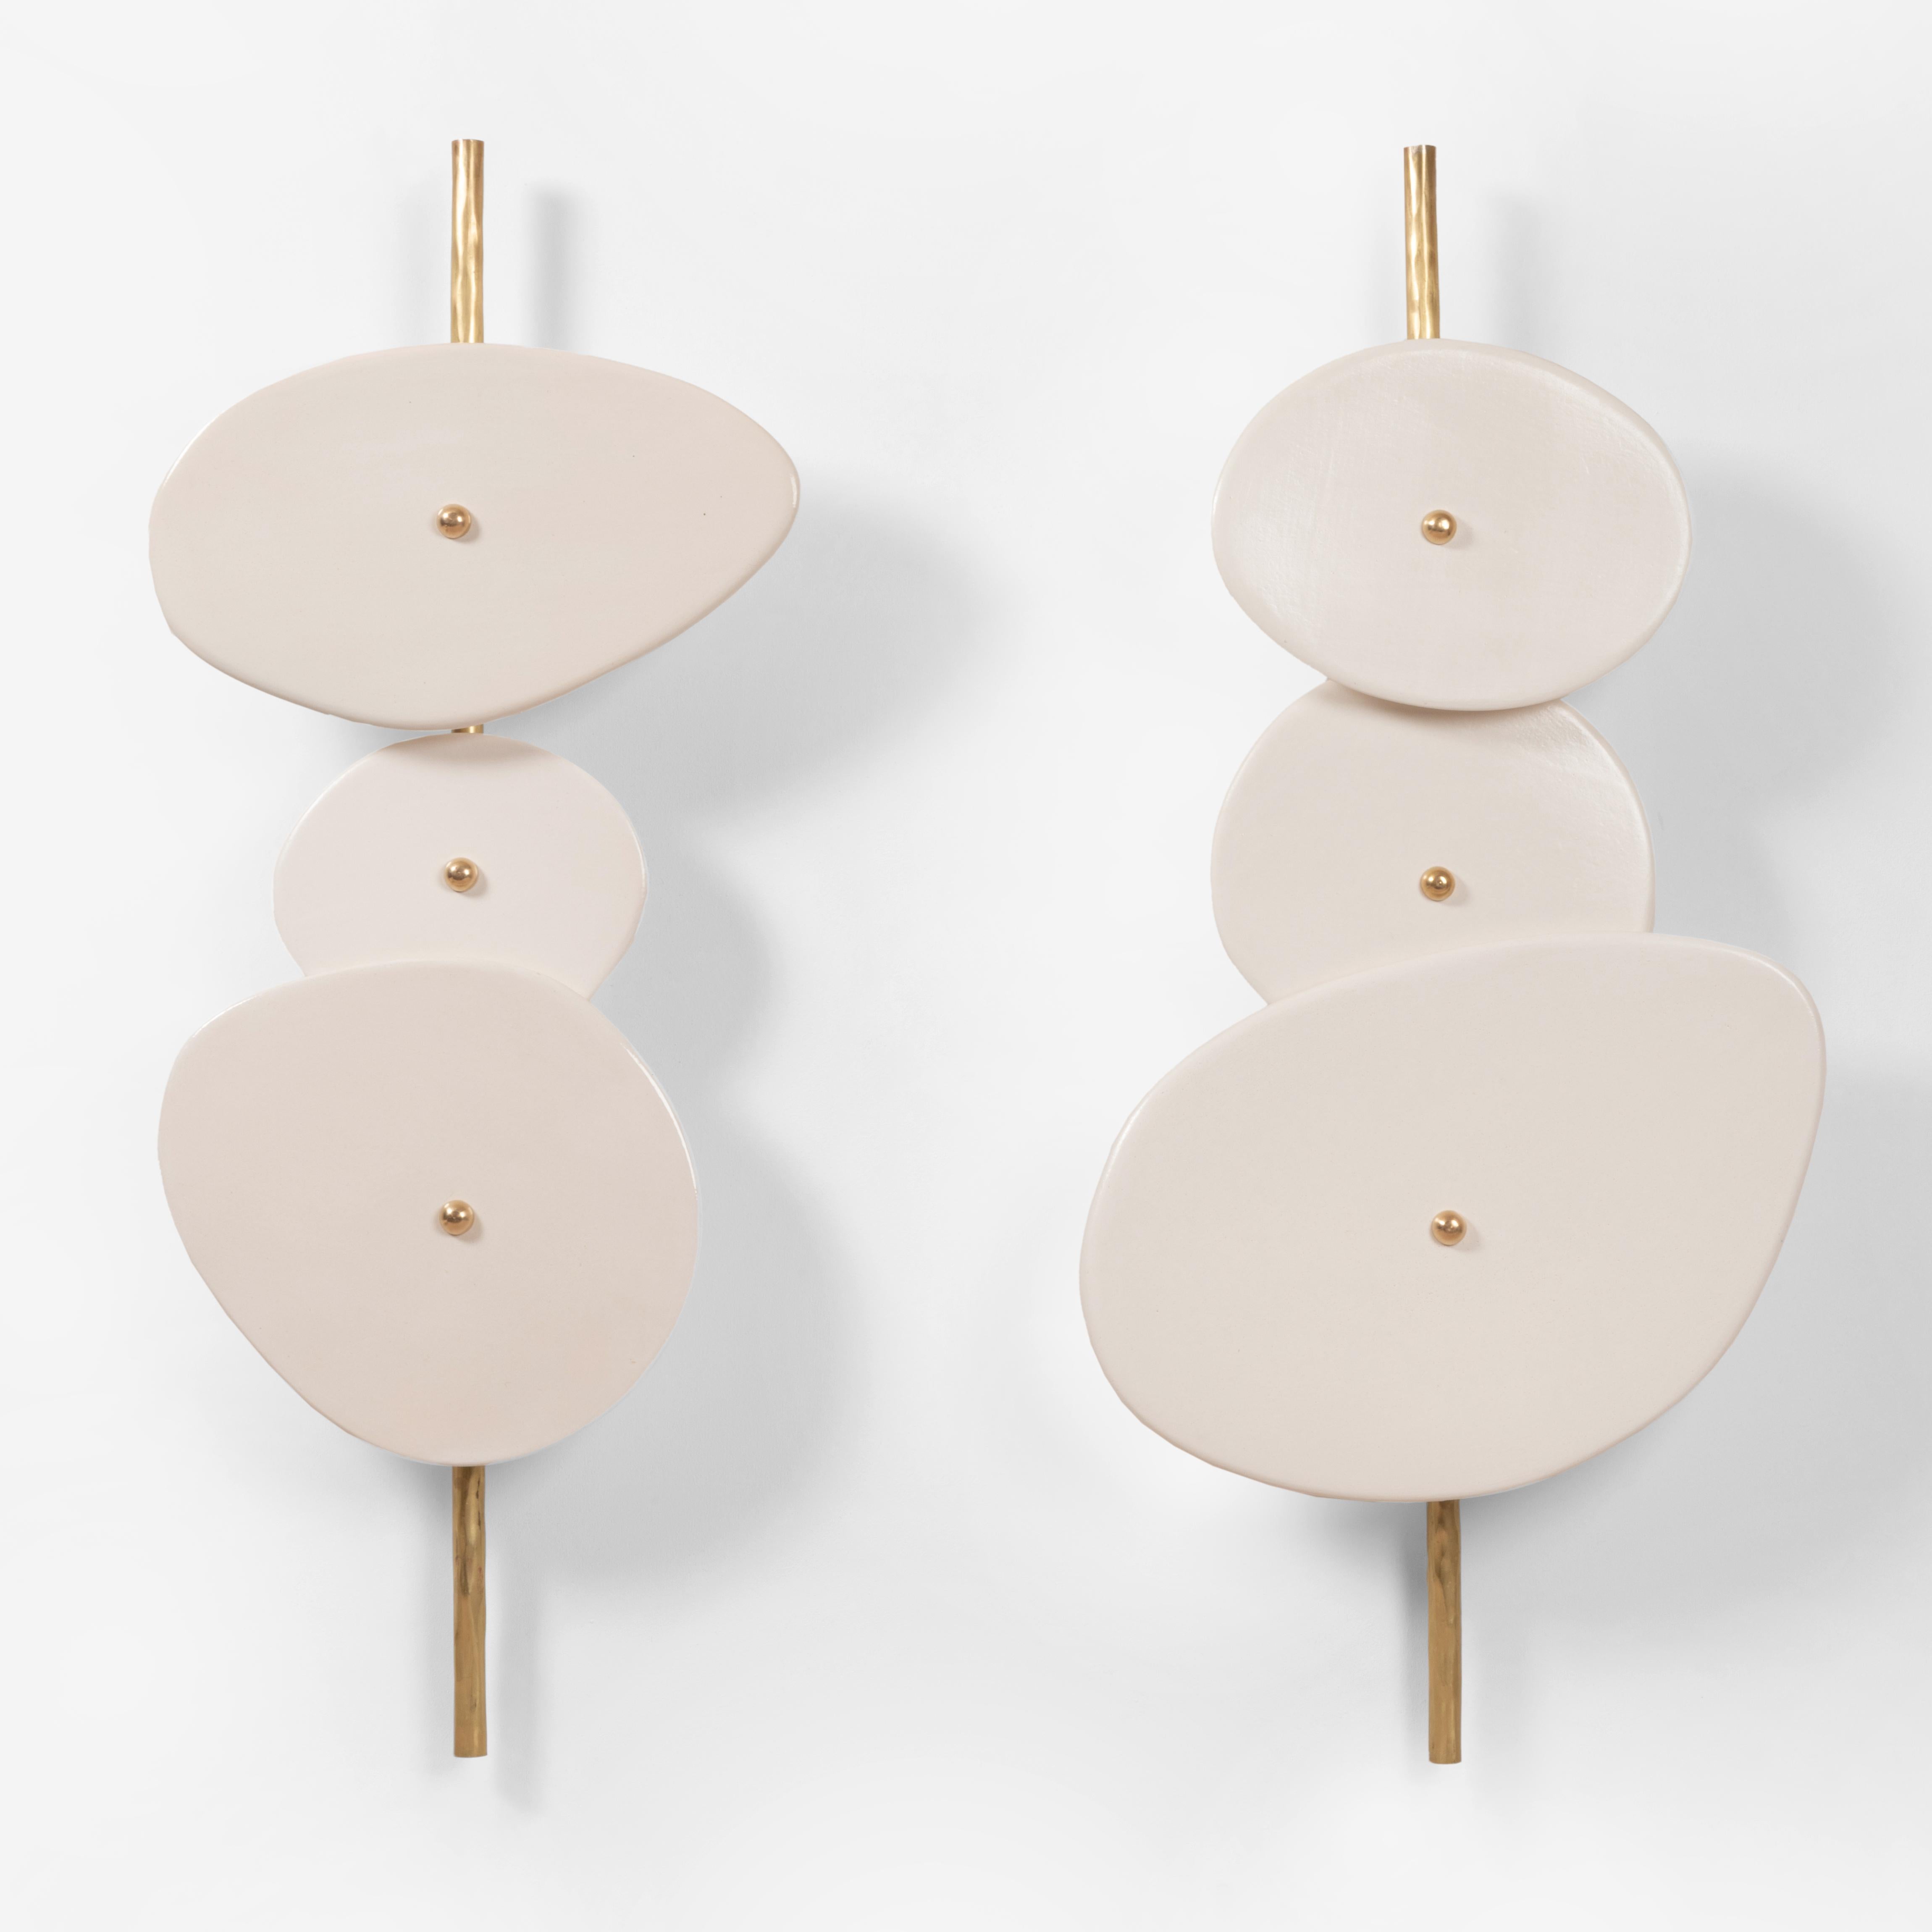 Set of 2 Achille Wall Sconces by Elsa Foulon.
Unique Pieces
Dimensions: H 75 cm
Materials: ceramic, brass

All our lamps can be wired according to each country. If sold to the USA it will be wired for the USA for instance.

Elsa Foulon, before